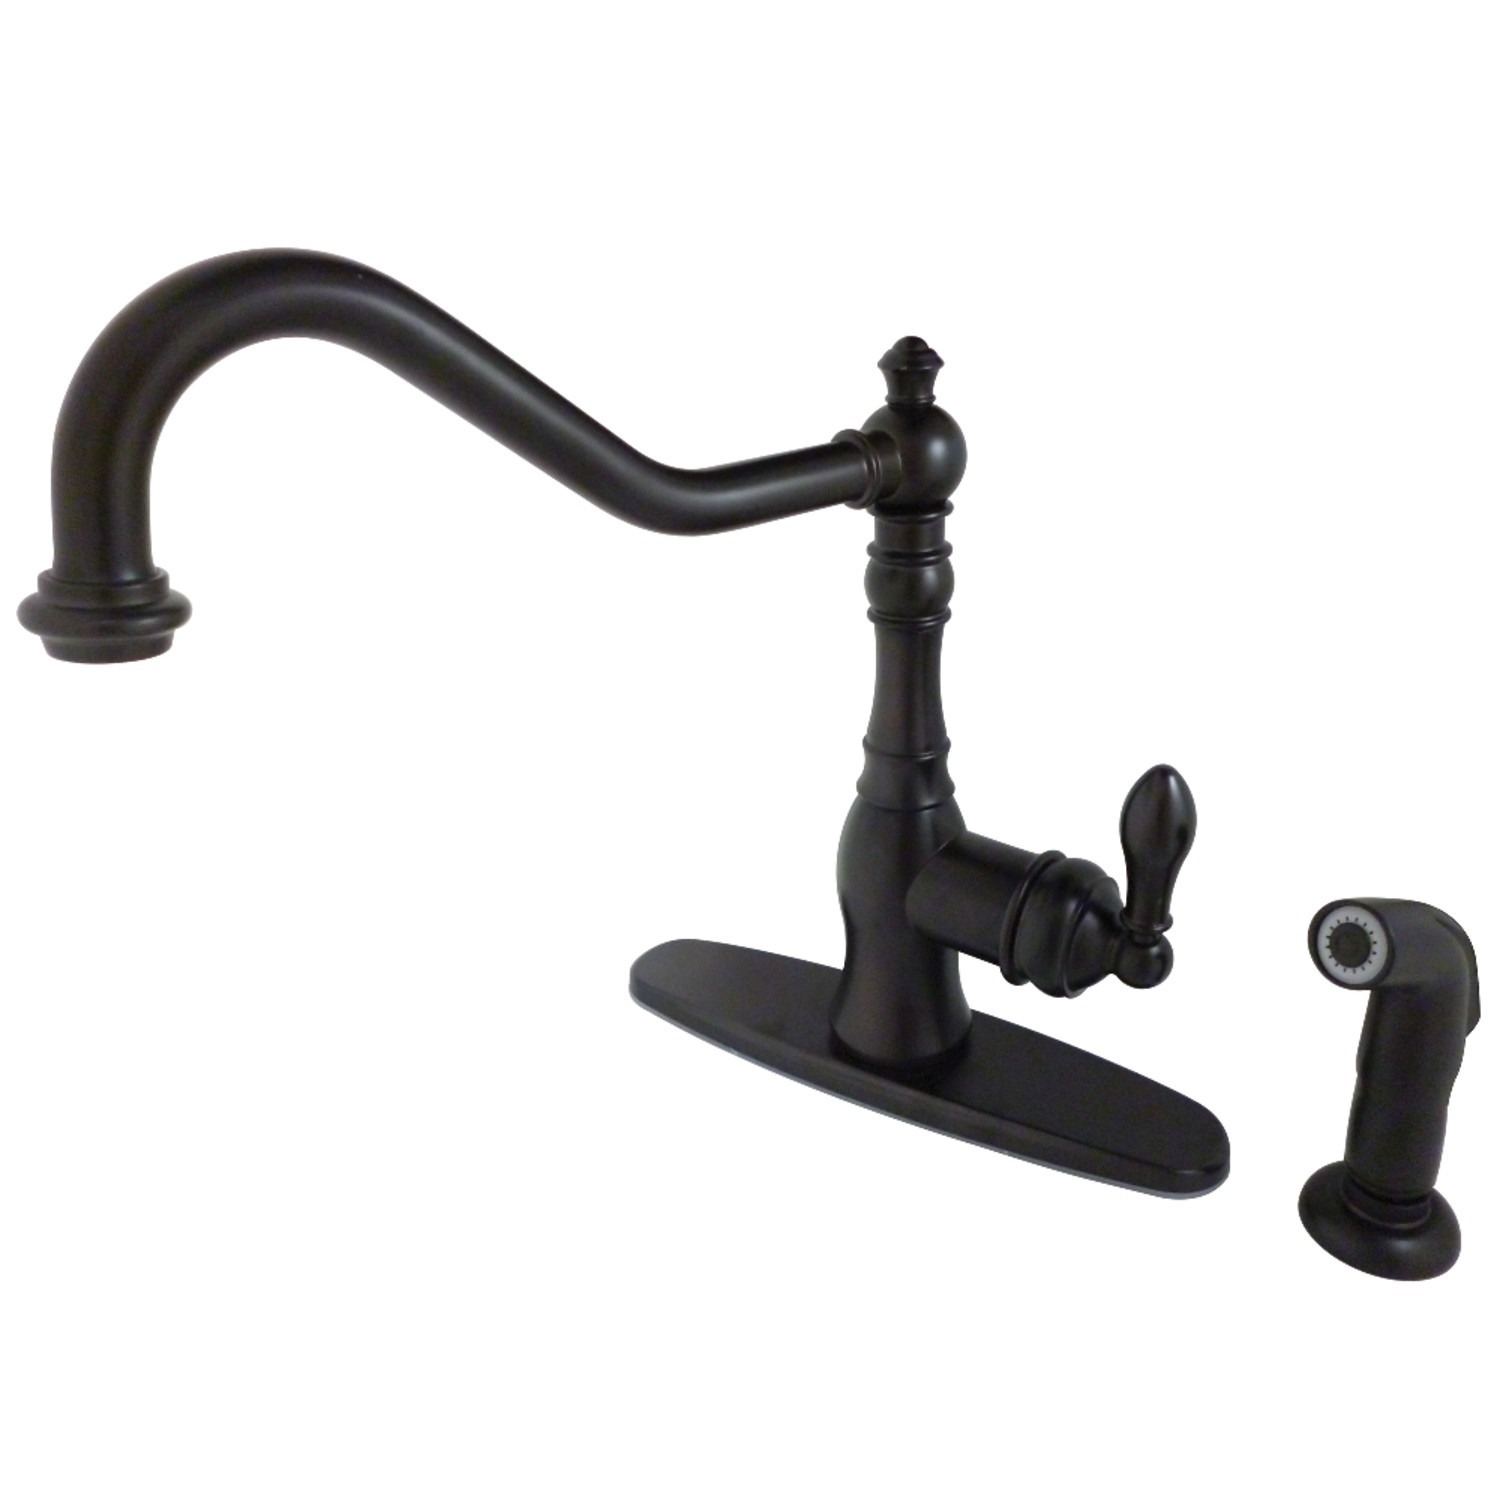 Gourmetier GSY7705ACLSP American Classic Single-Handle Kitchen Faucet with Brass Sprayer, Oil Rubbed Bronze - image 1 of 5